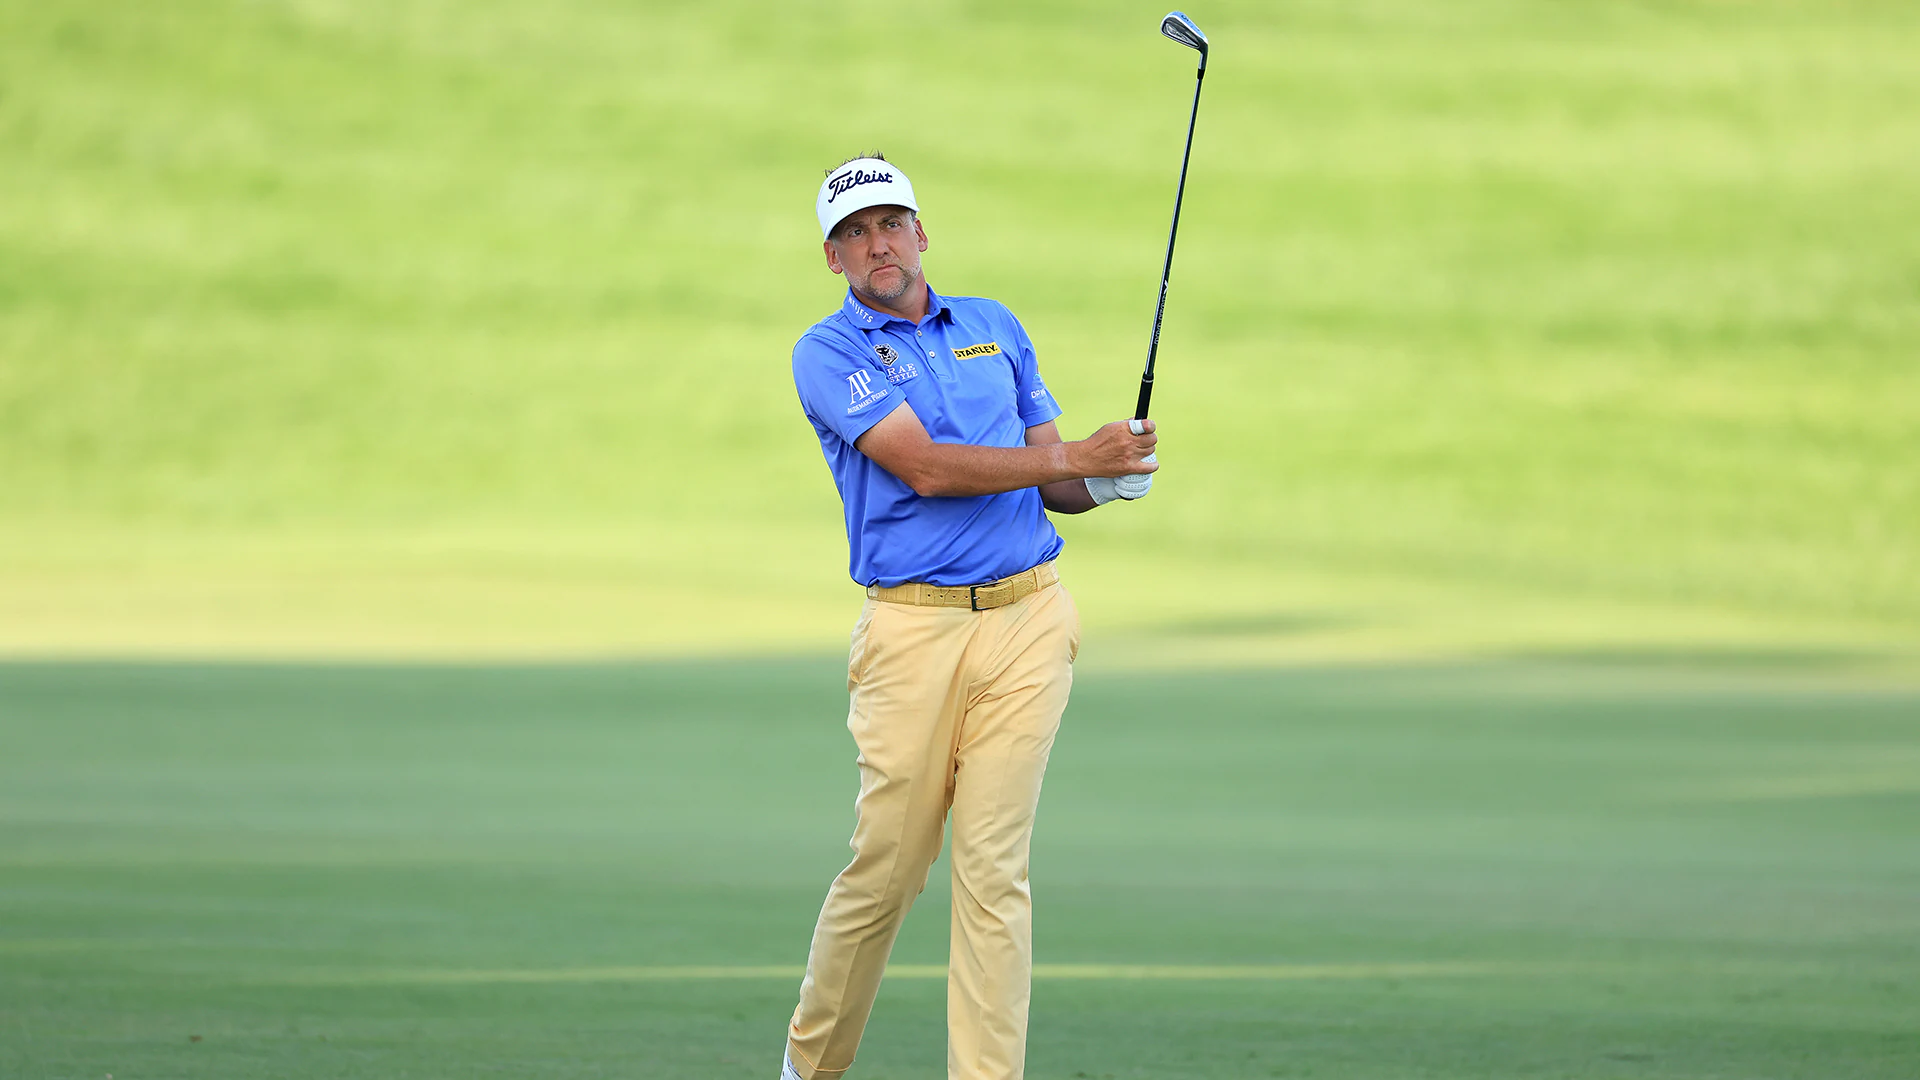 Ian Poulter wears Ukraine colors: 'In respect to those suffering over there' 2